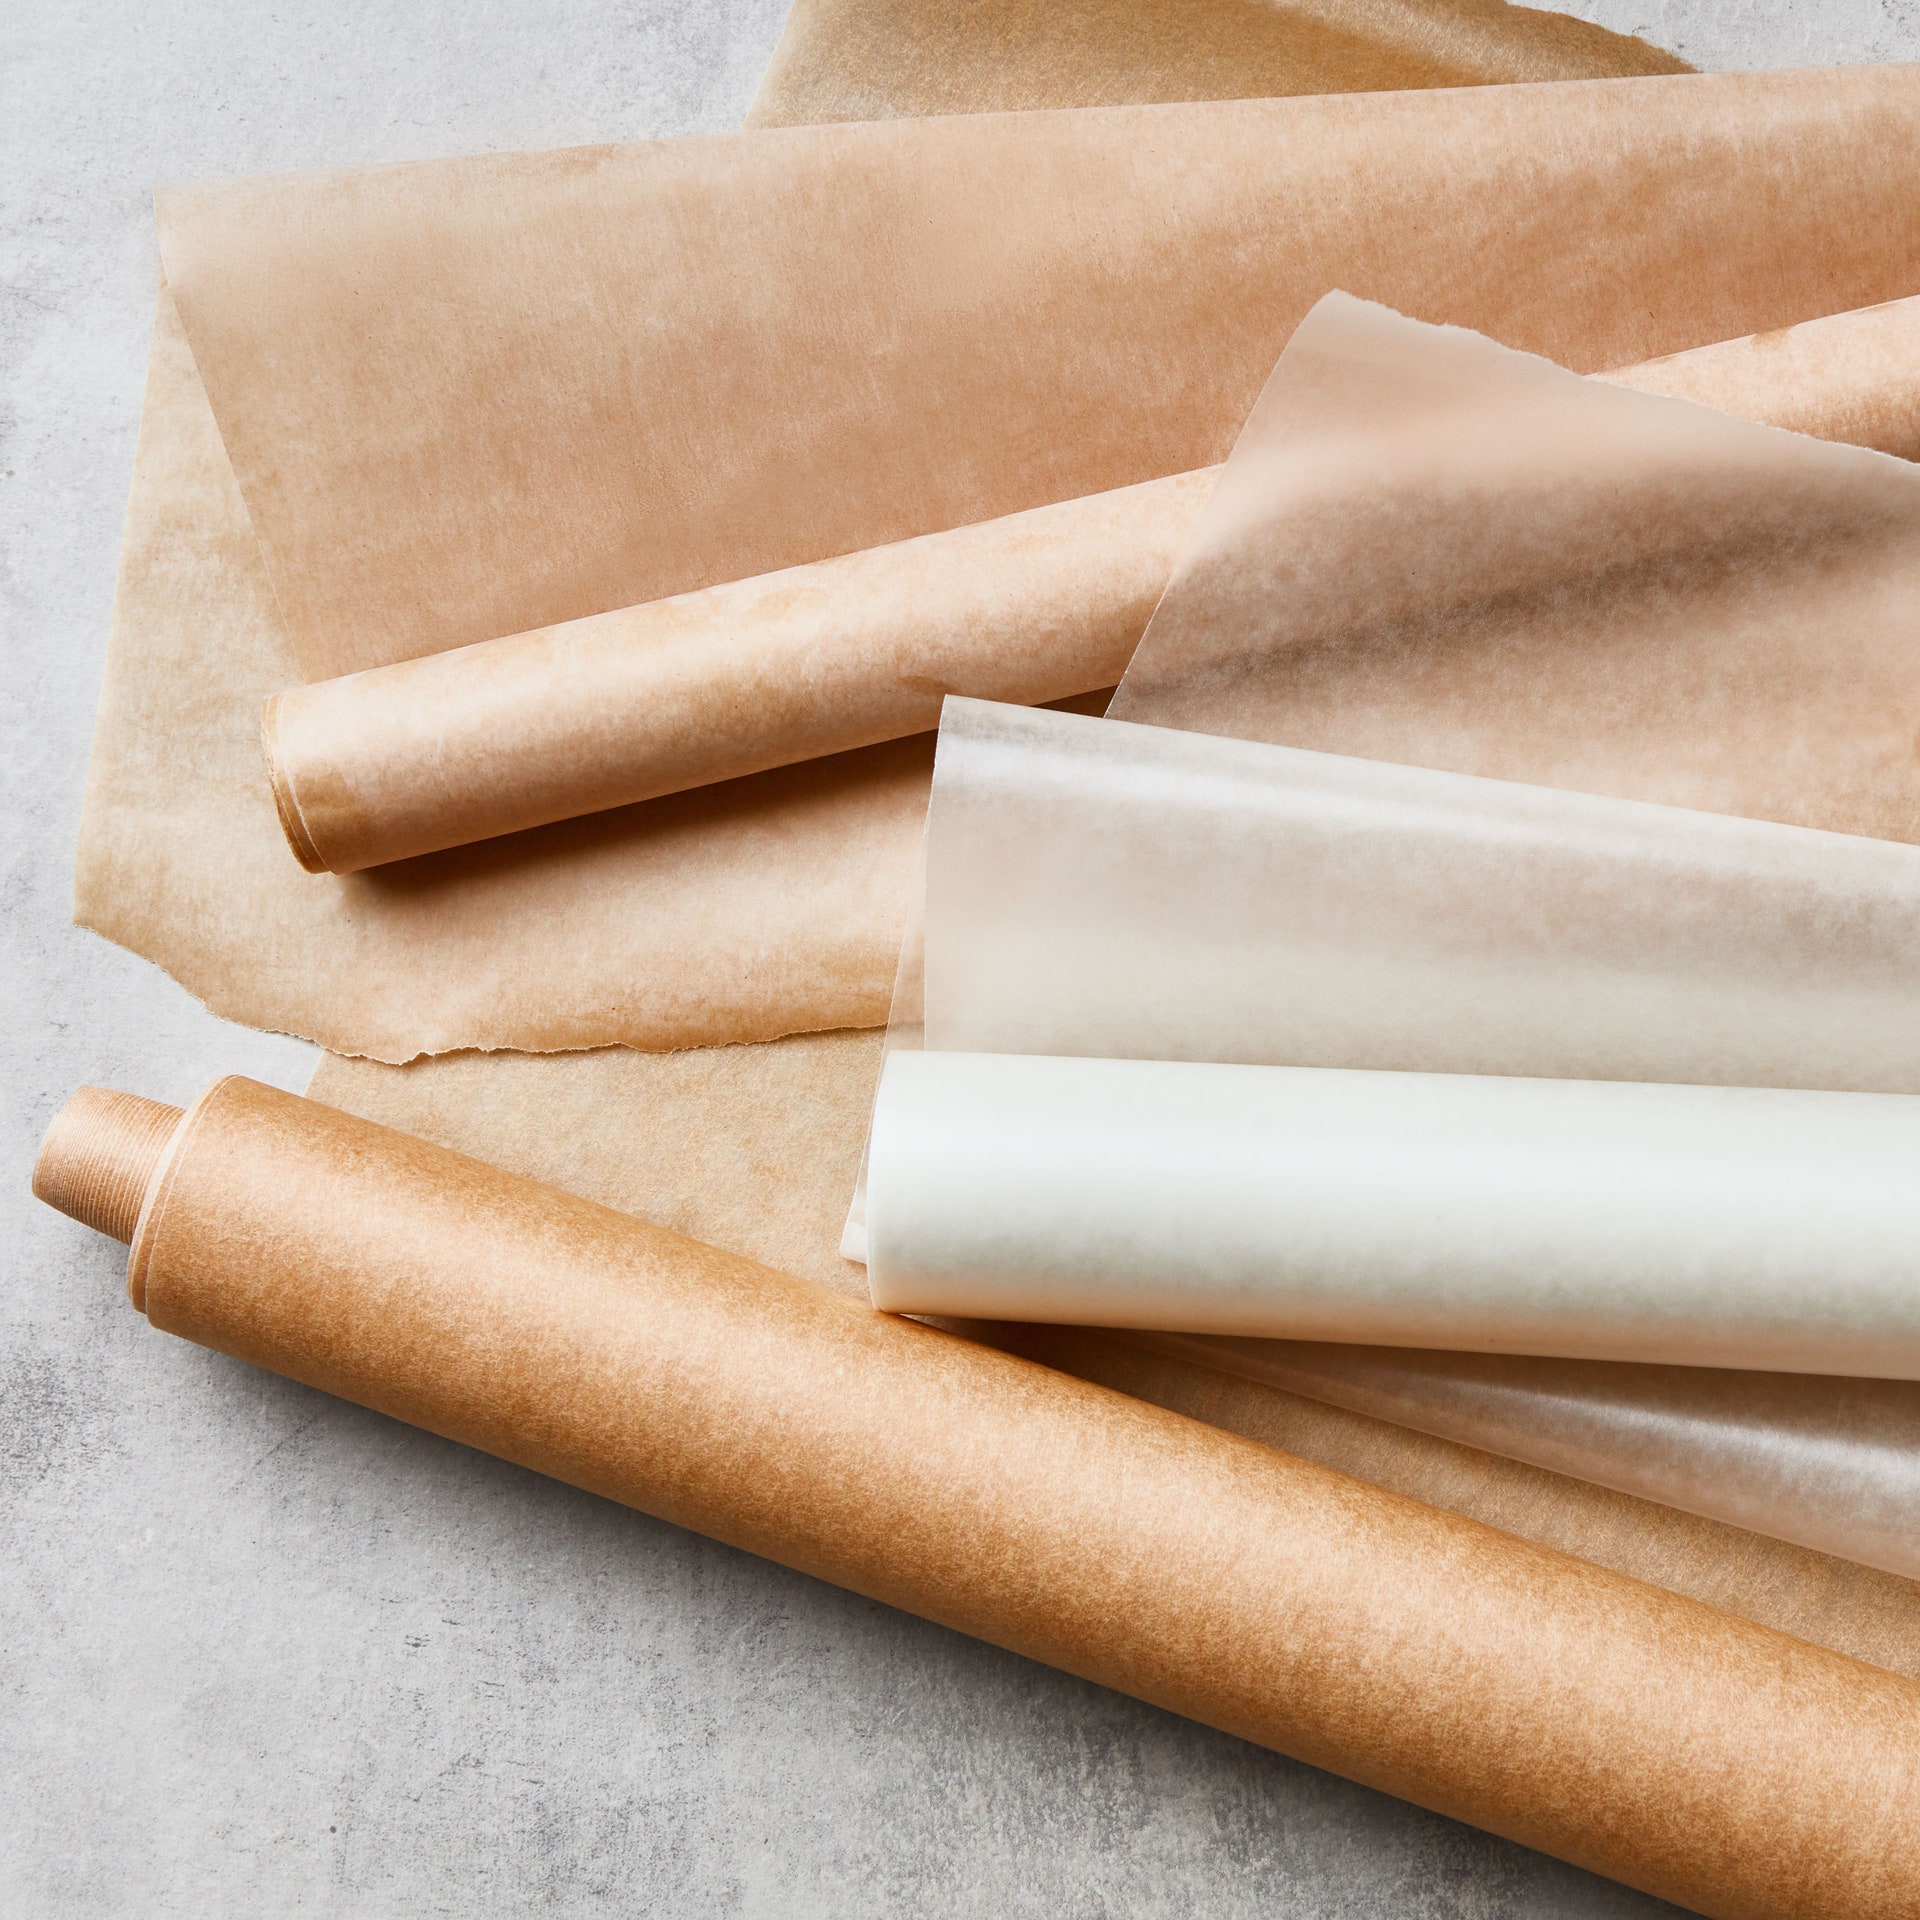 Two rolls of parchment paper and a roll of wax paper.